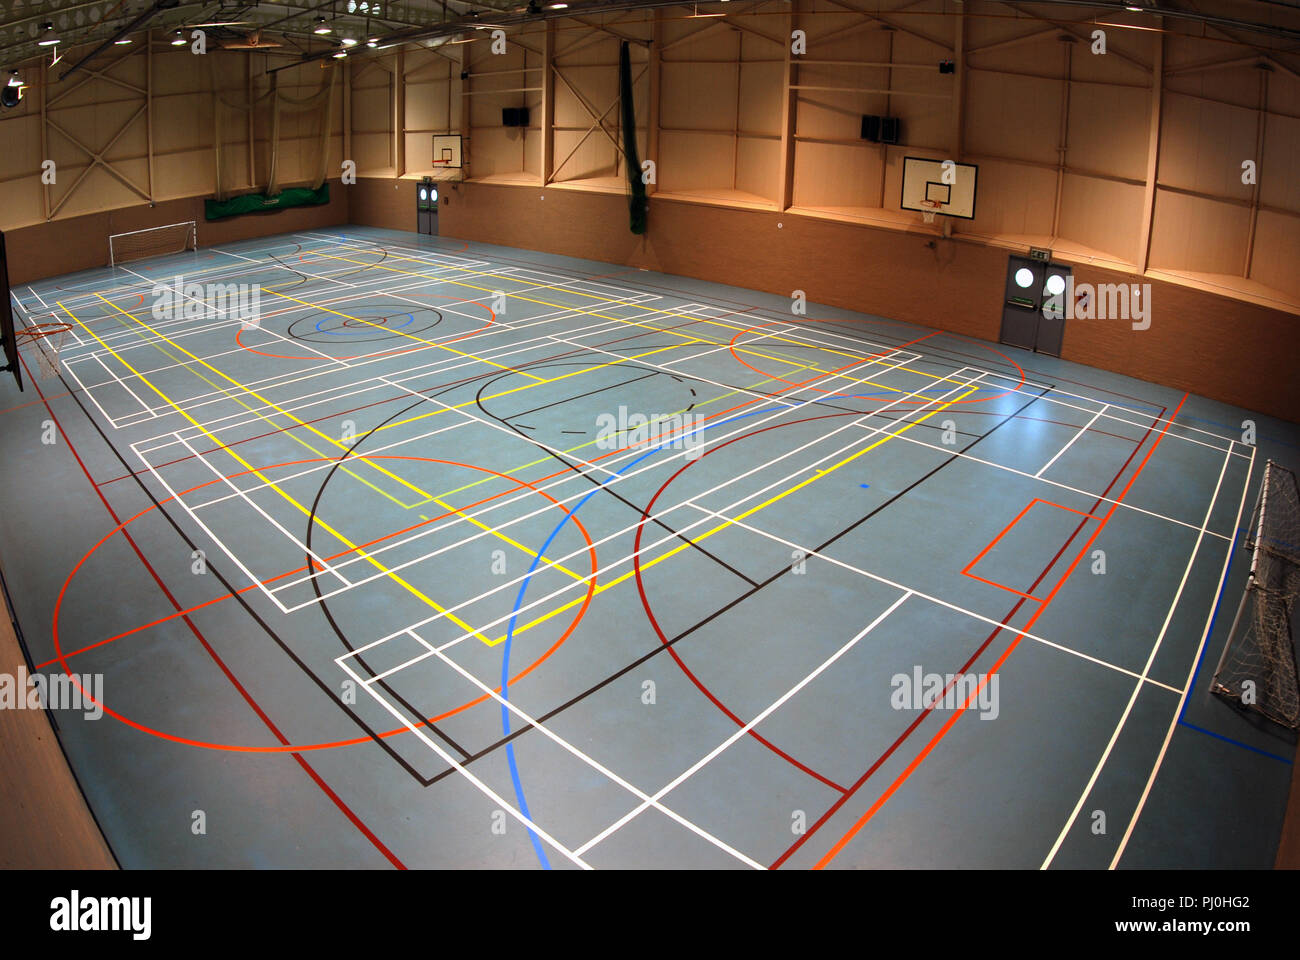 Confusing lines on the floor of an indoor sports hall Stock Photo